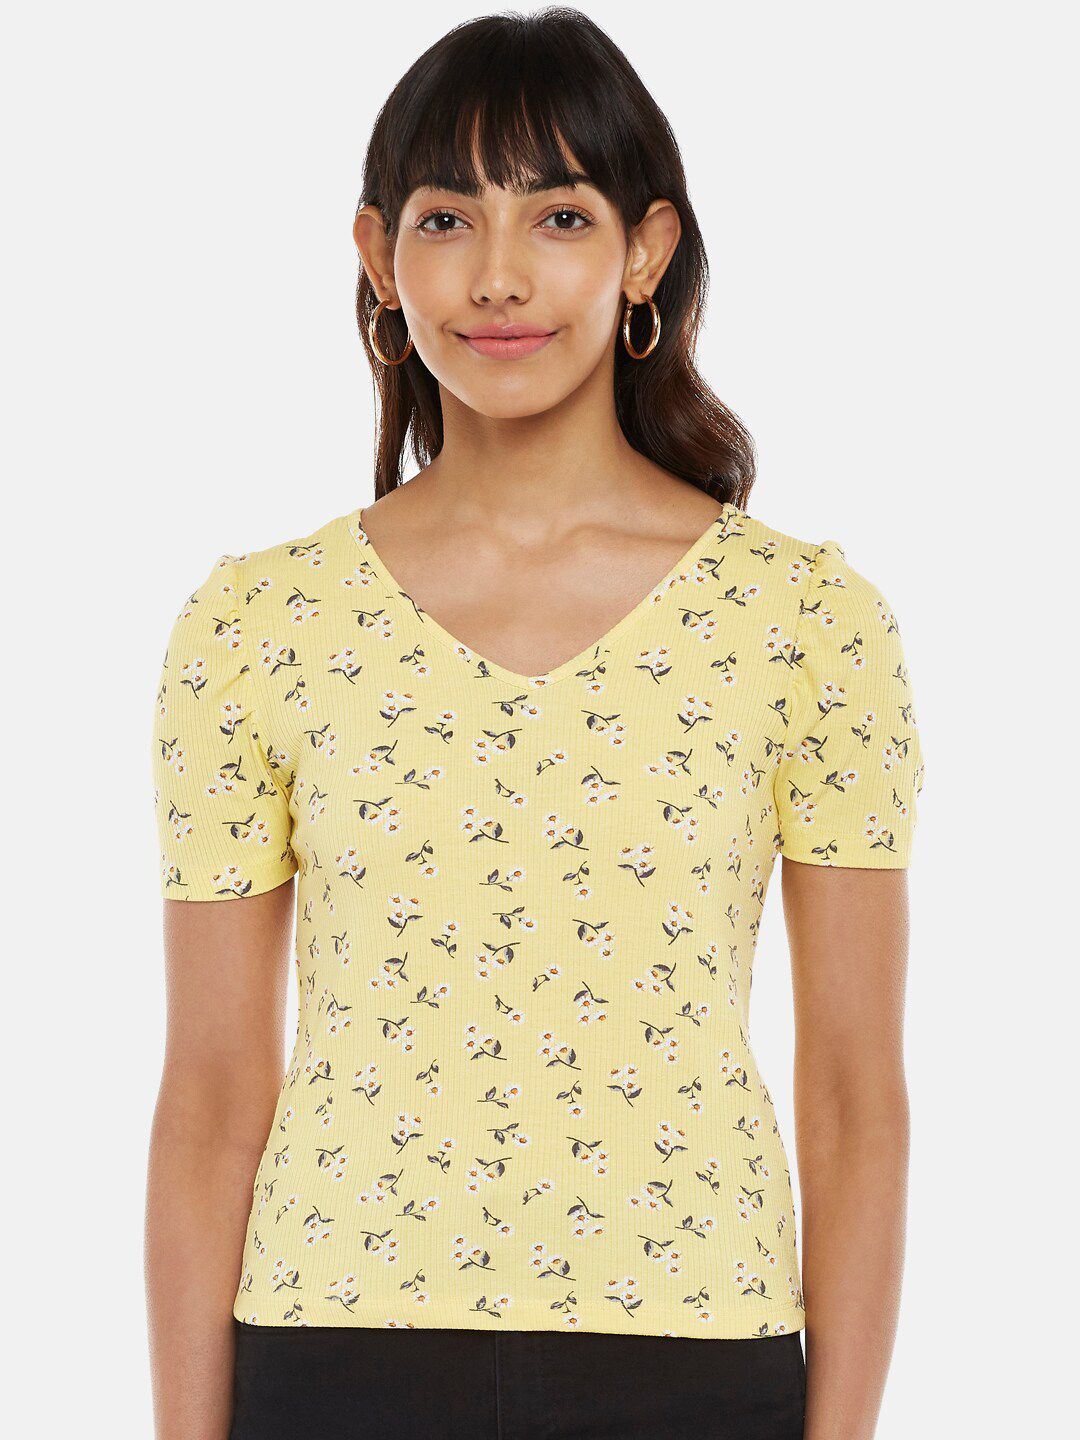 Honey by Pantaloons Yellow Floral Print Top Price in India